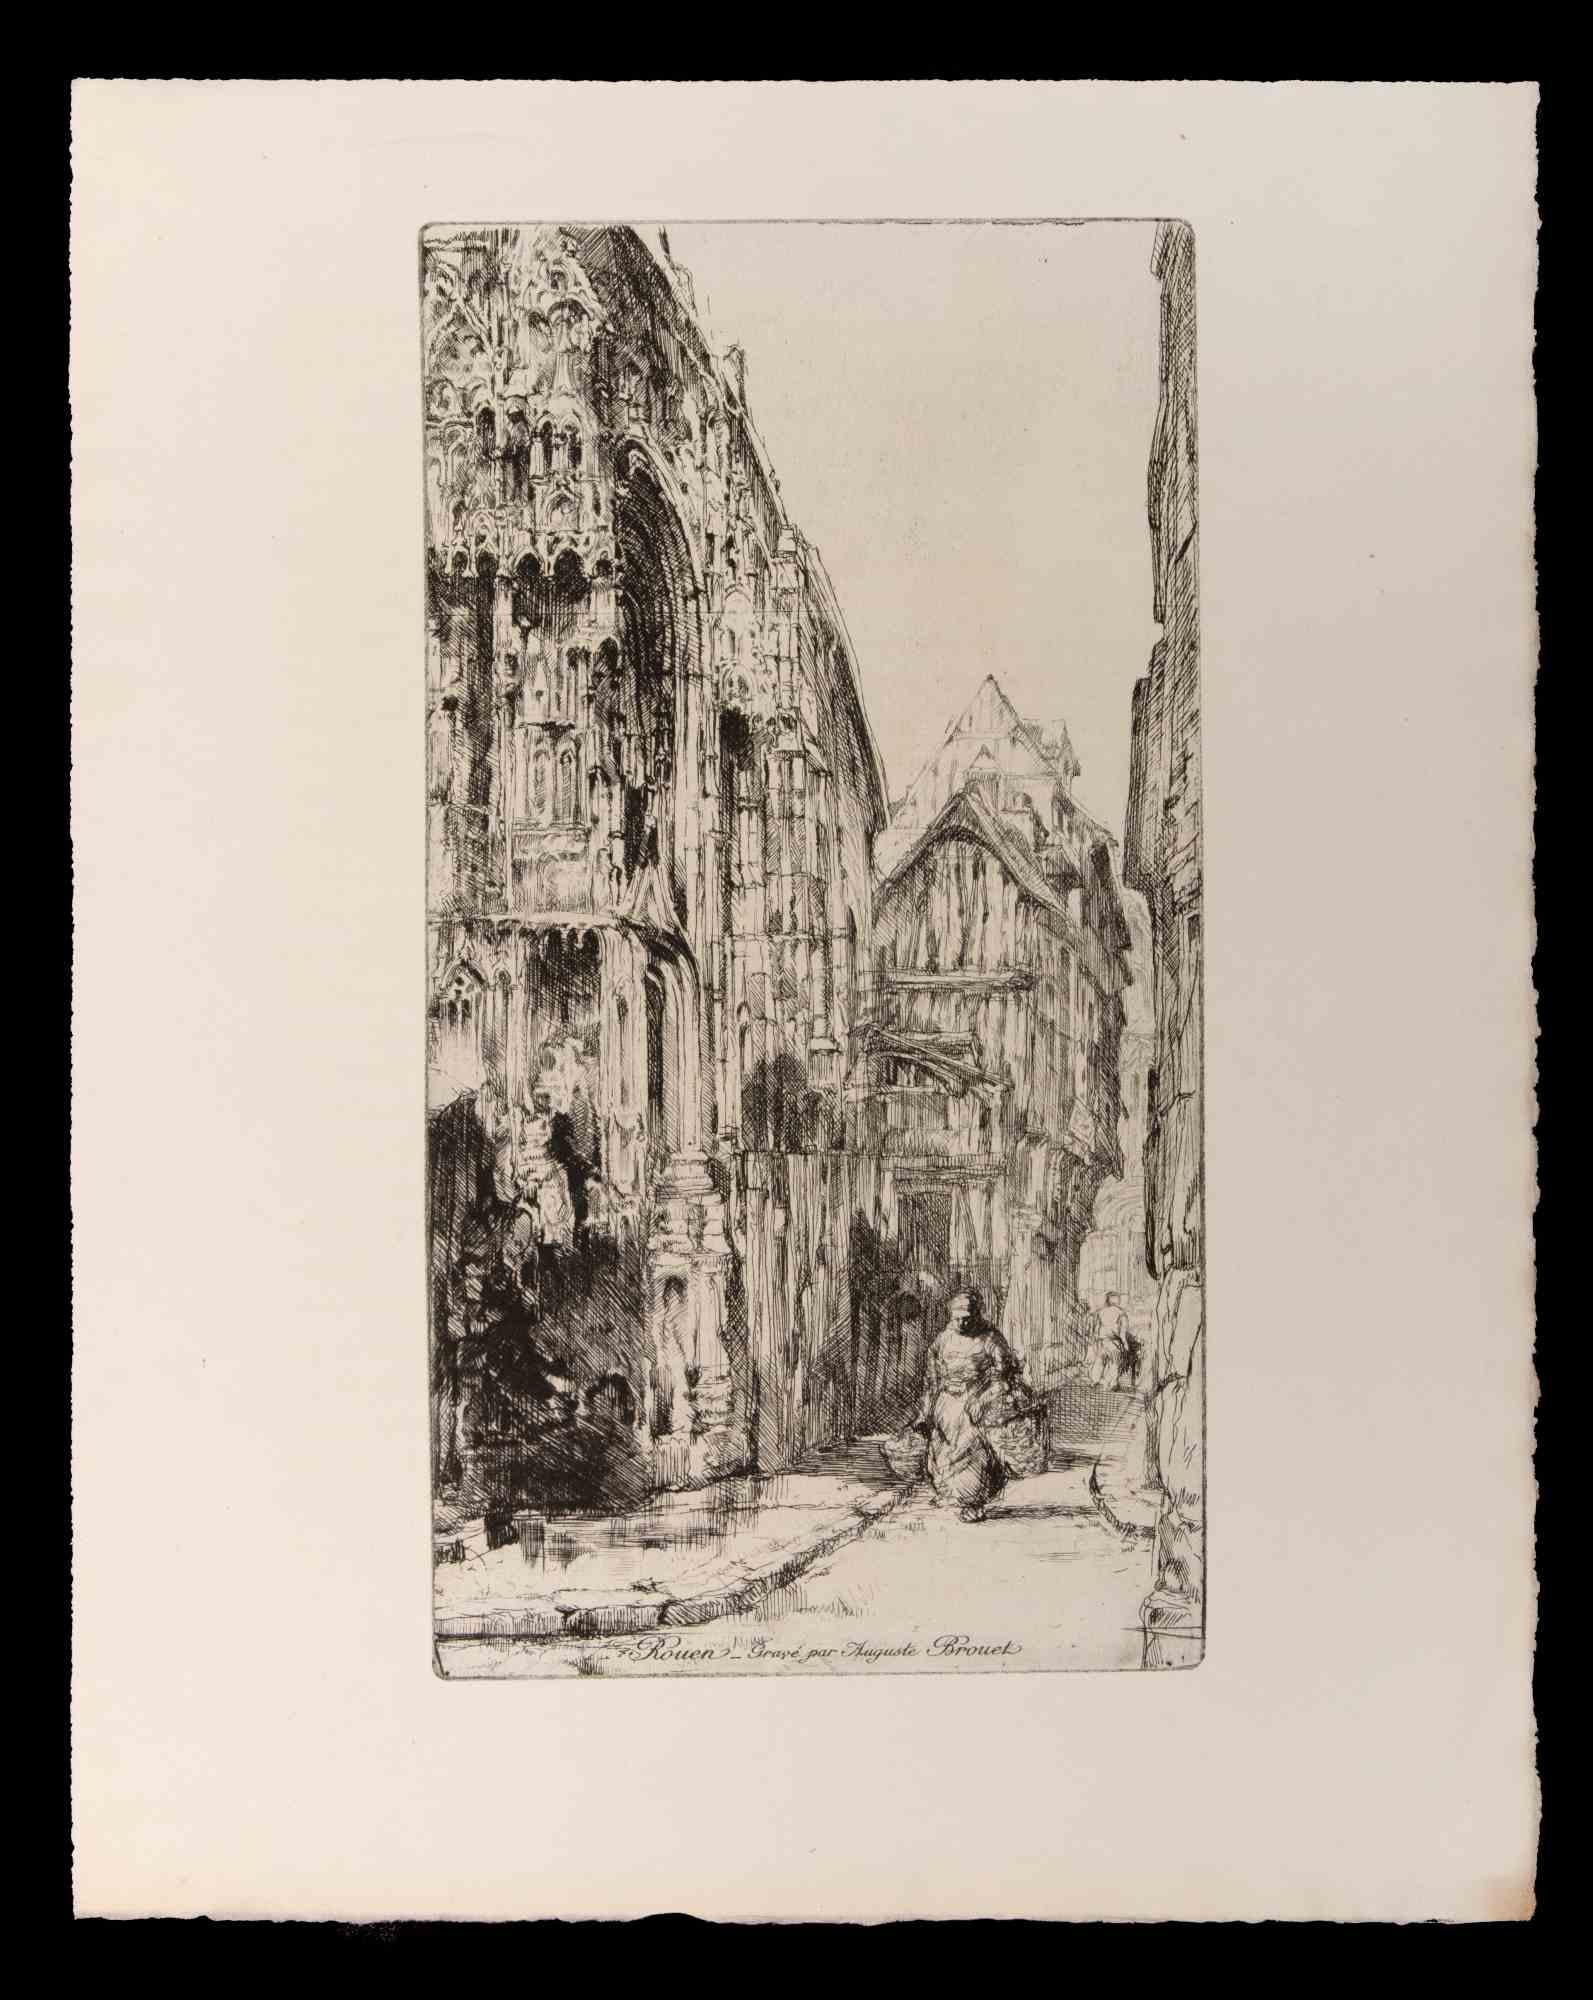 Rouen - Original Etching by Auguste Brouet - Early 20th Century